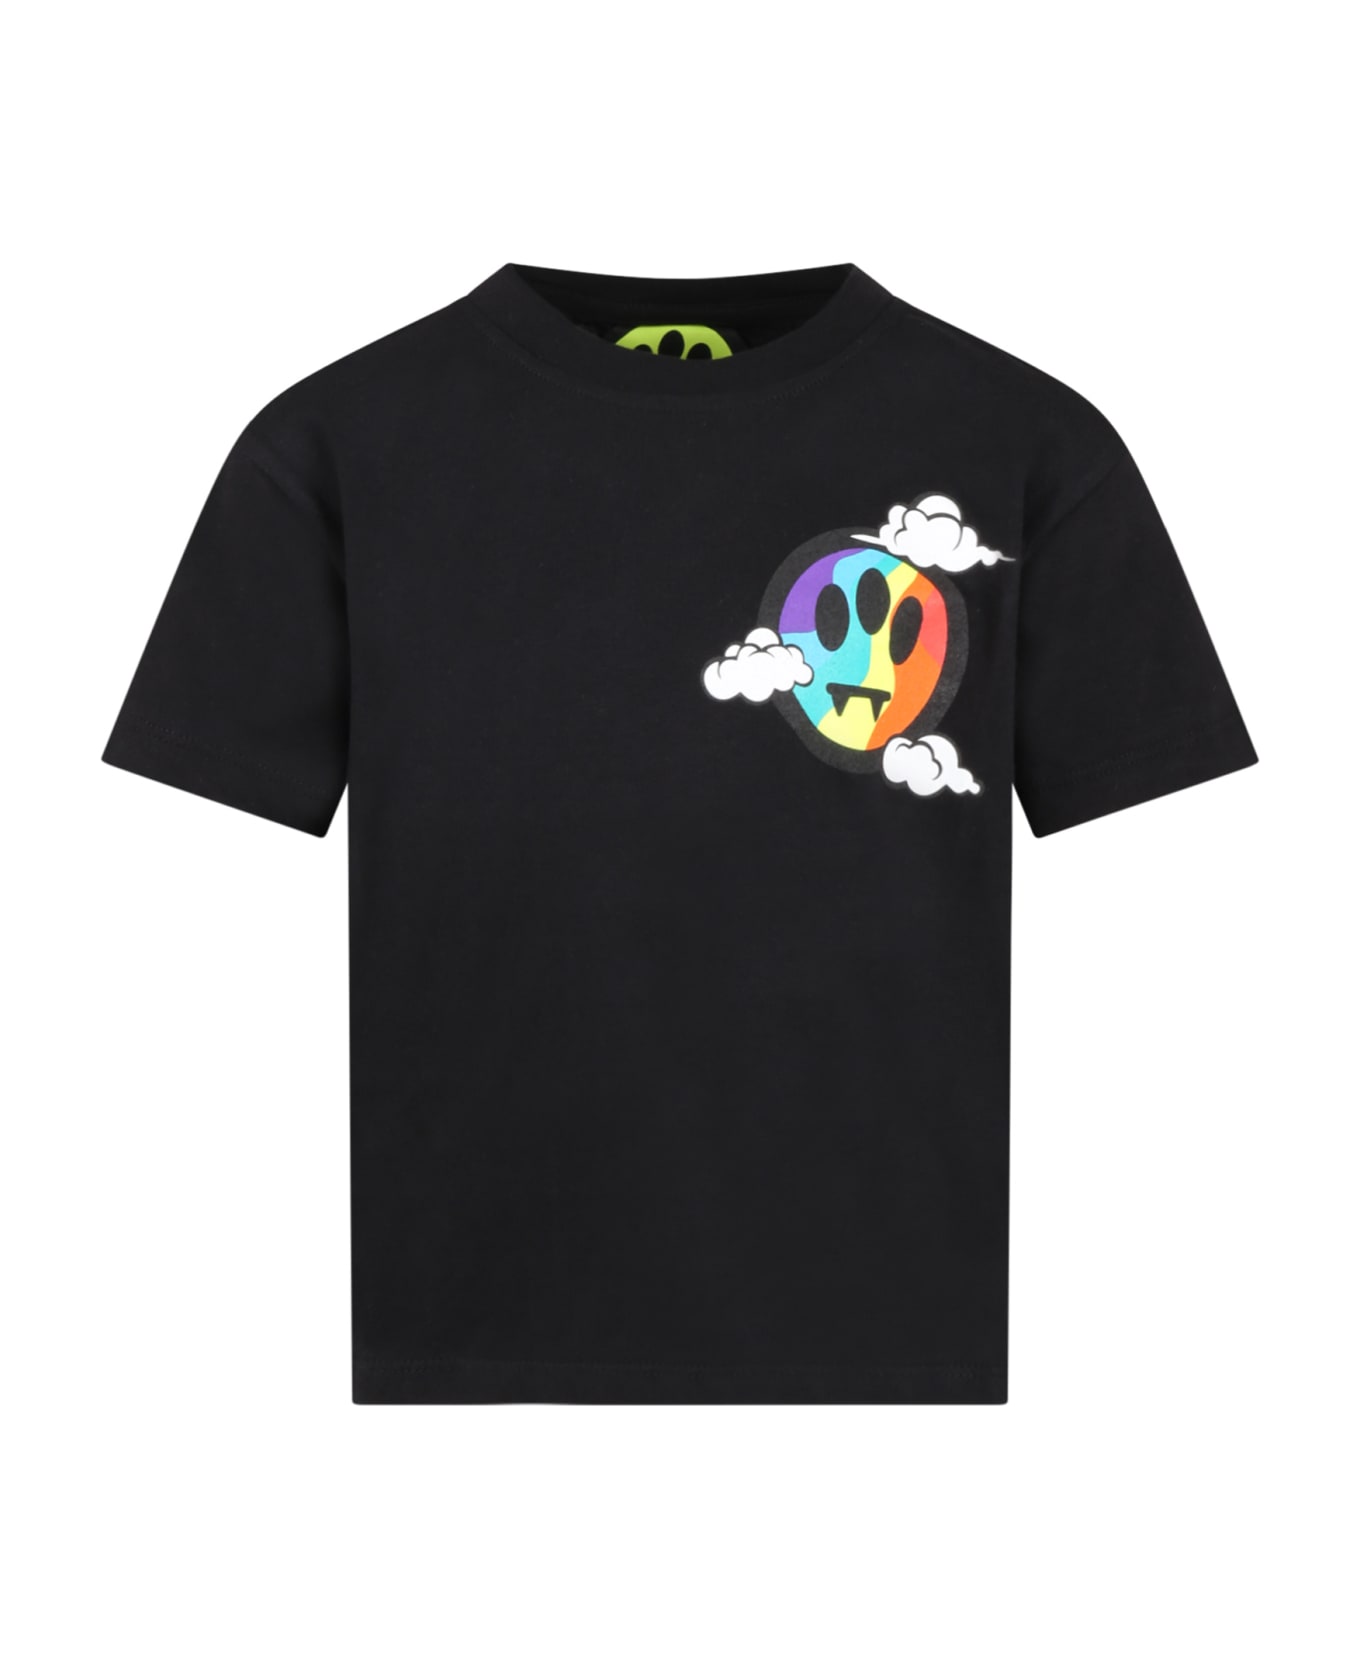 Barrow Black T-shirt For Kids With Smiley And Logo - Nero